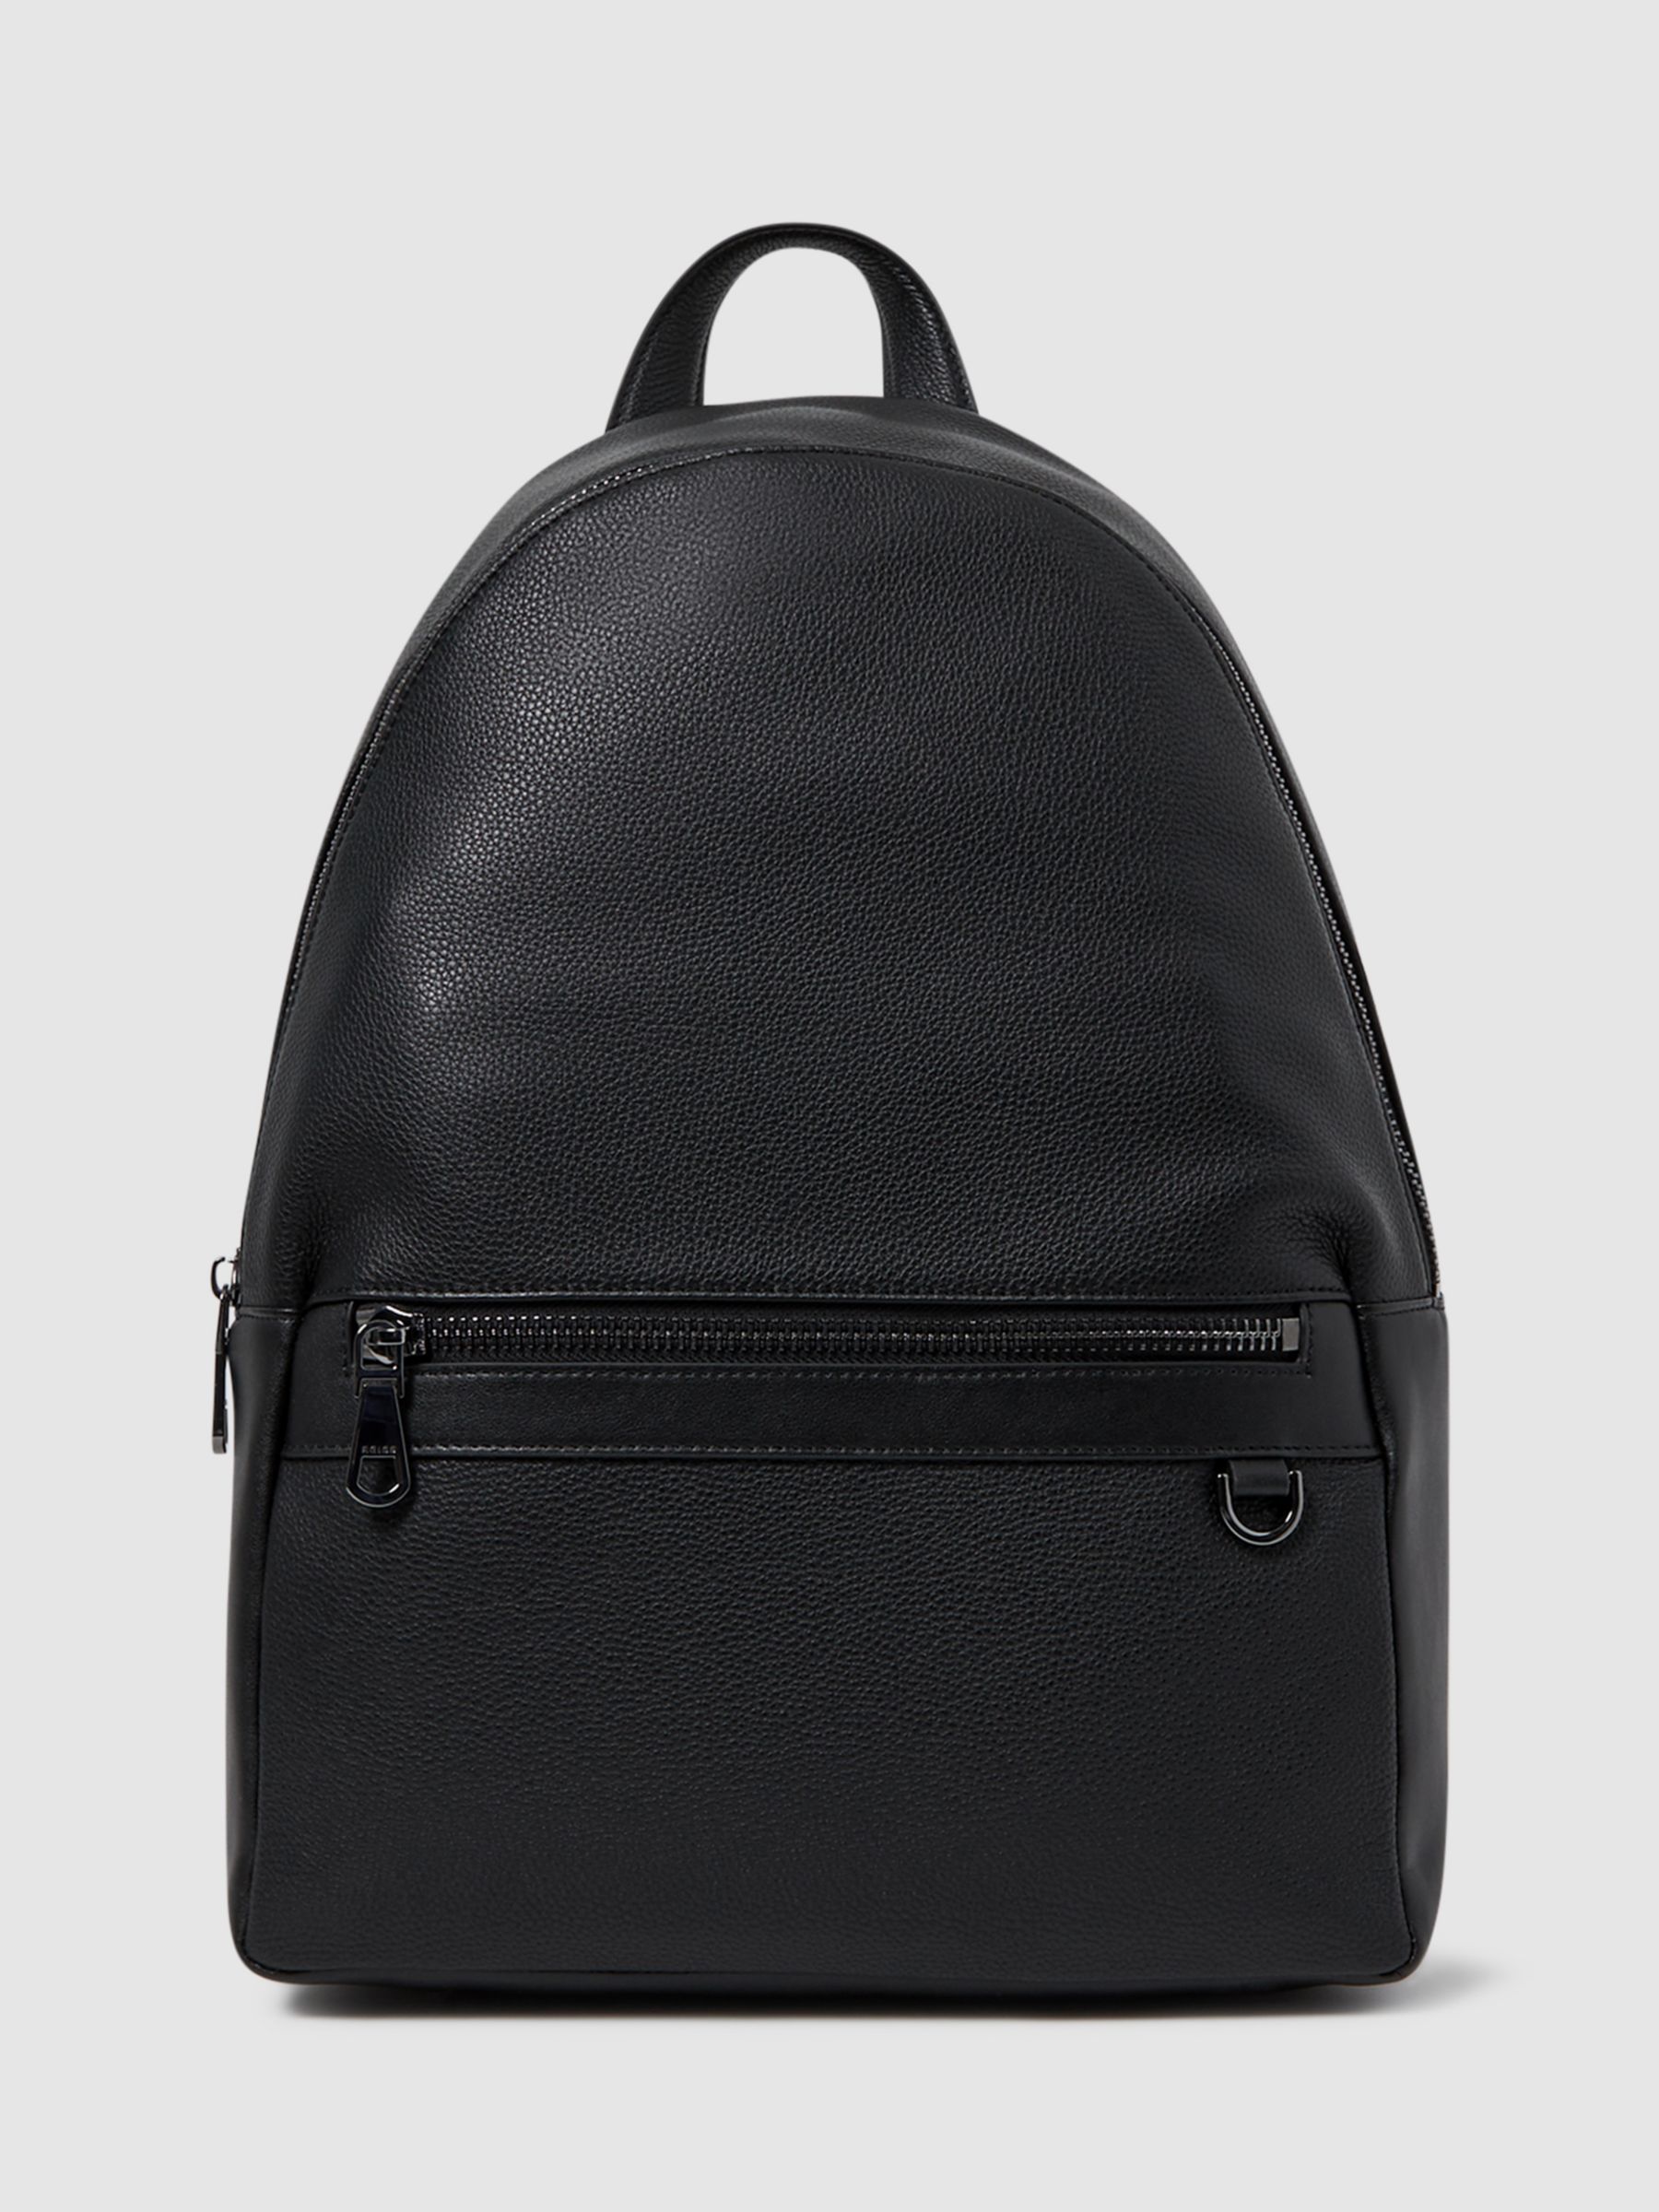 Reiss Drew Leather Backpack, Black at John Lewis & Partners